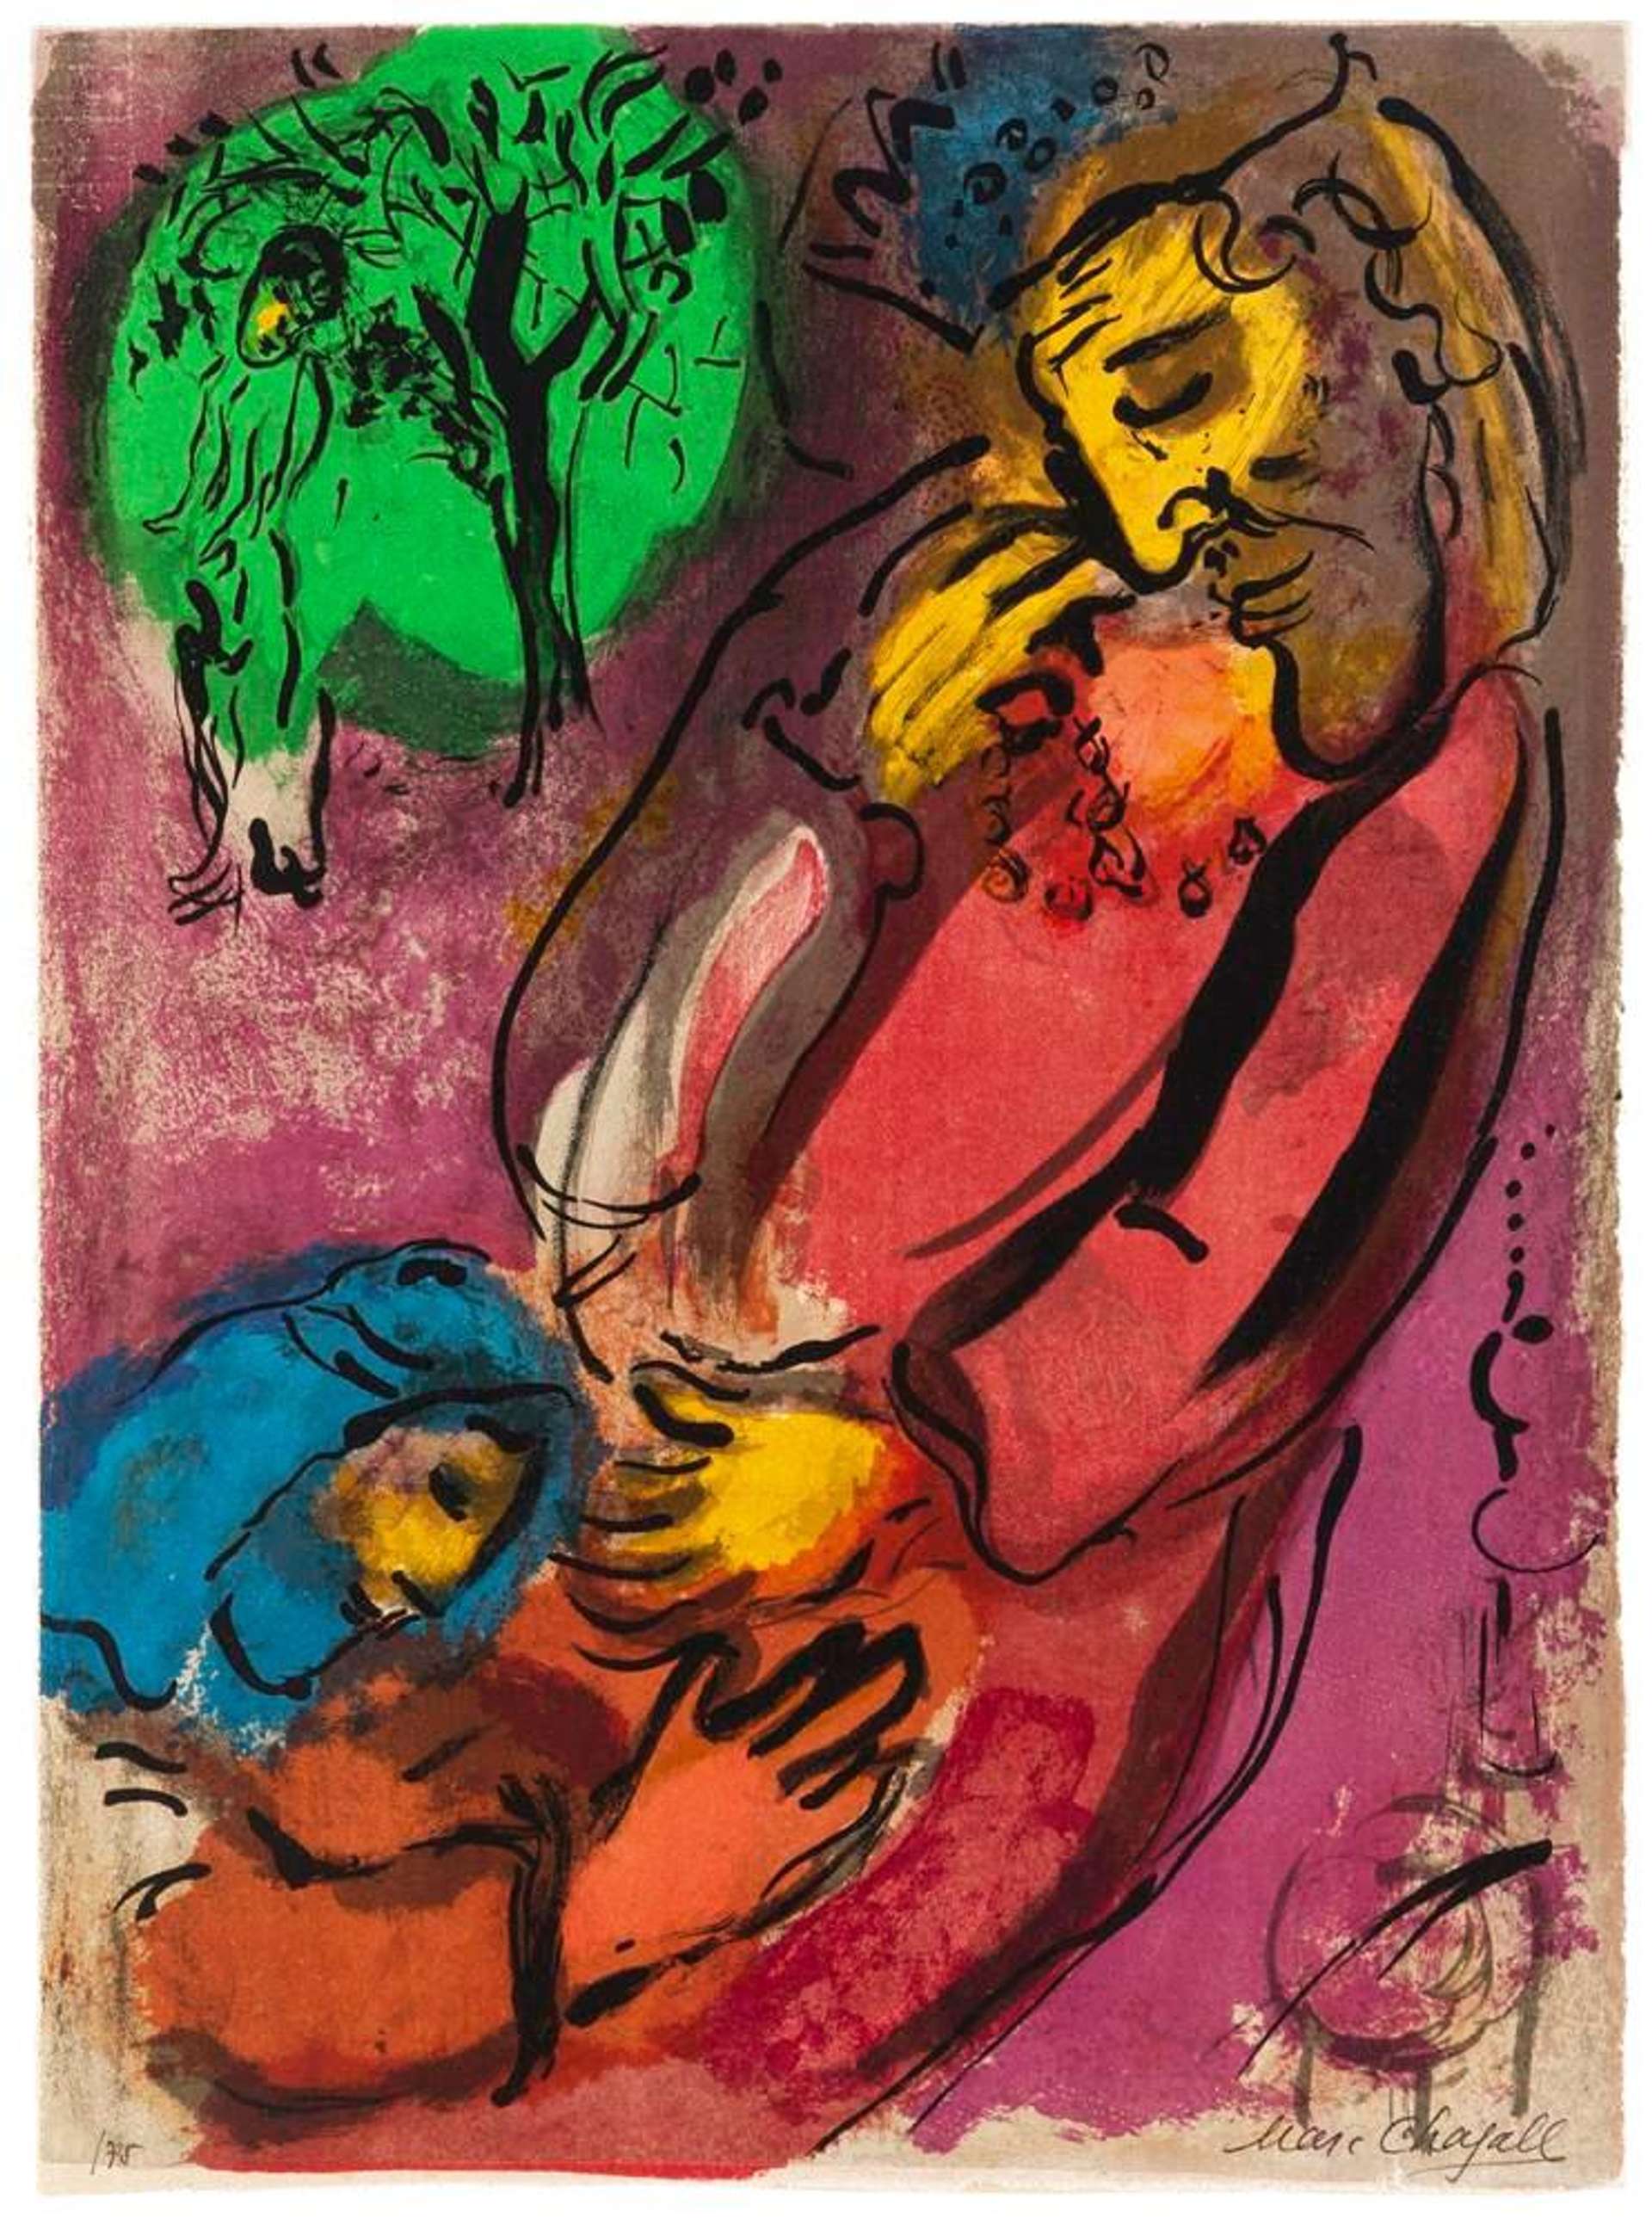 Marc Chagall: David And Absalom - Signed Print